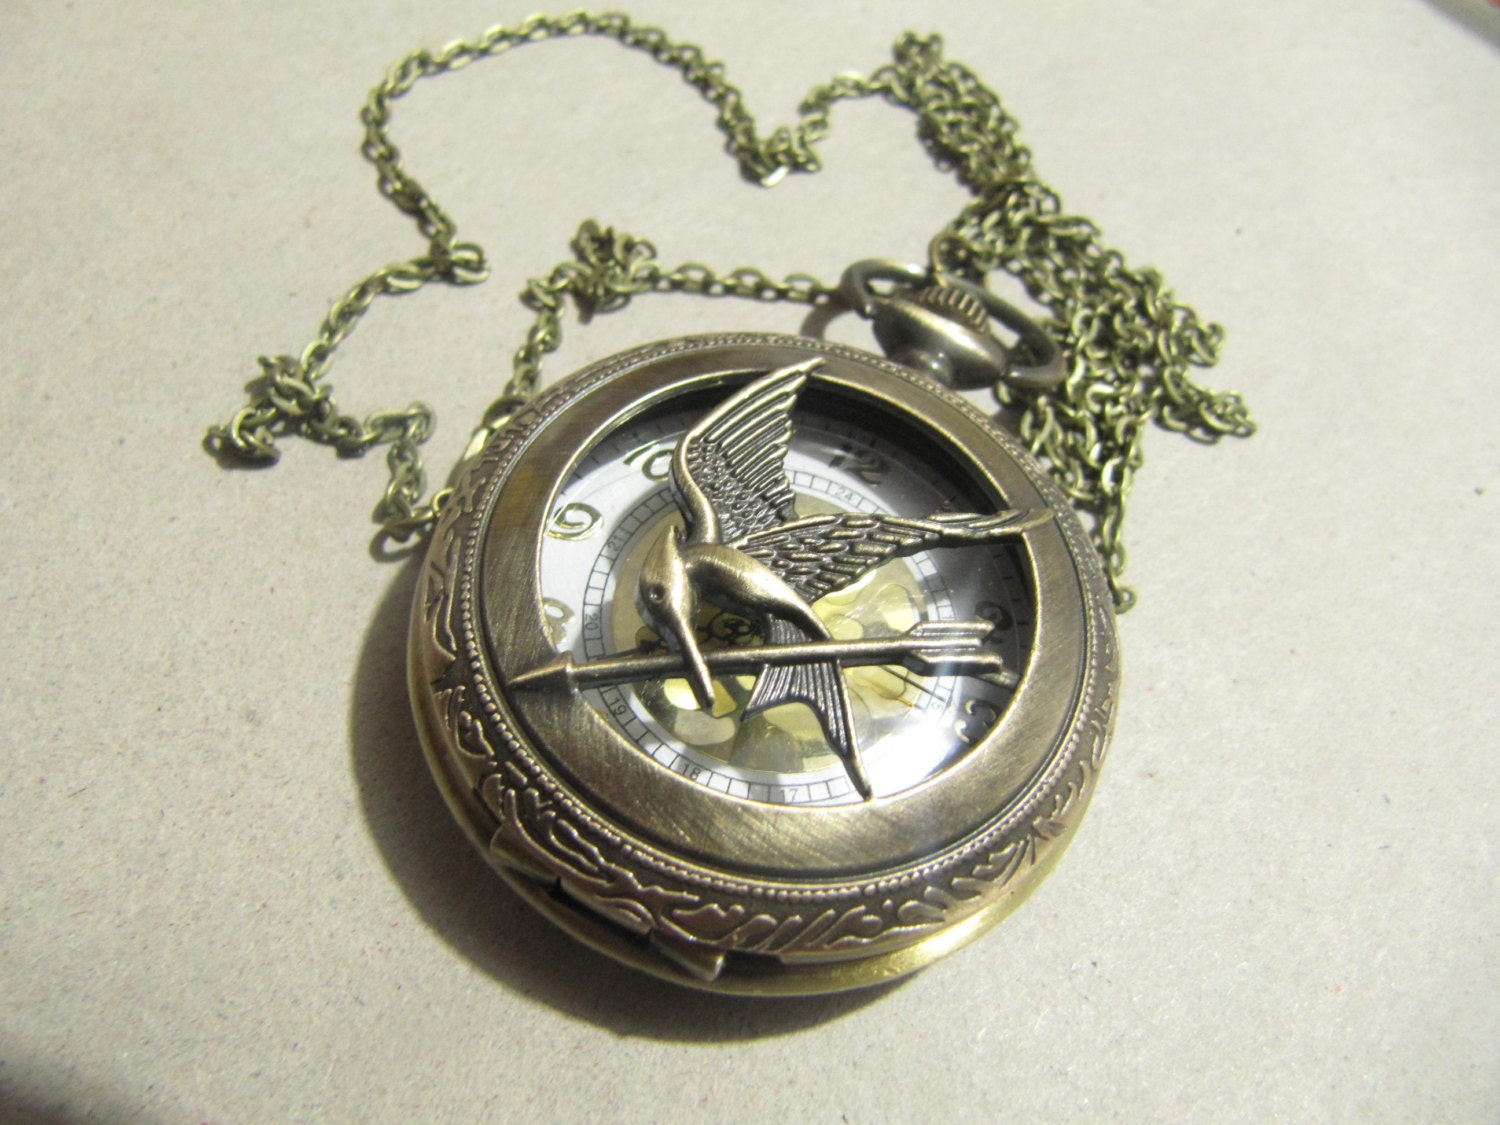 The Hunger Games Pocket Watch Necklace, Inspired Mockingjay Locket Necklace With Arrow in retro style